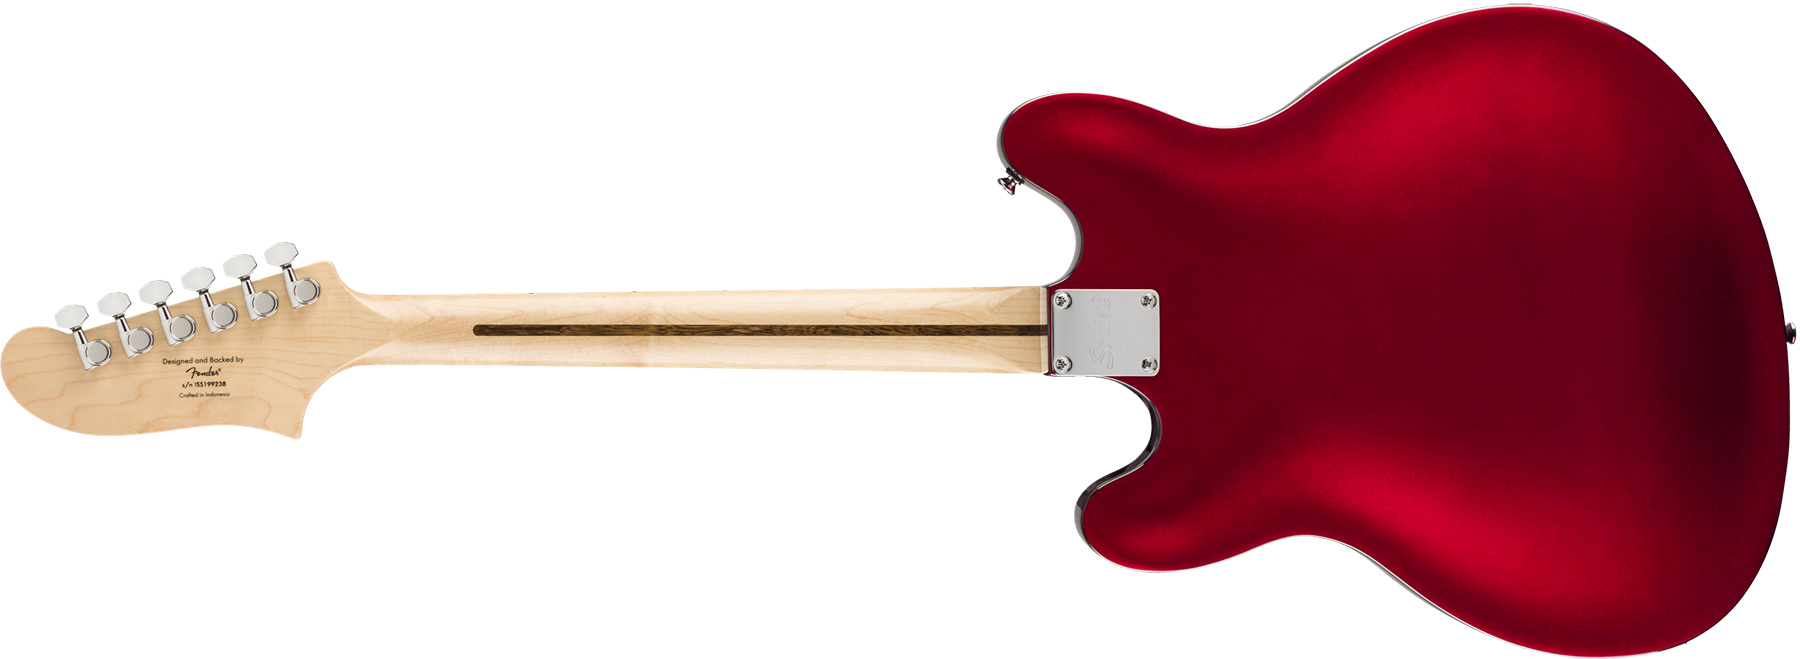 Squier Starcaster Affinity 2019 Hh Ht Mn - Candy Apple Red - Semi-Hollow E-Gitarre - Variation 1